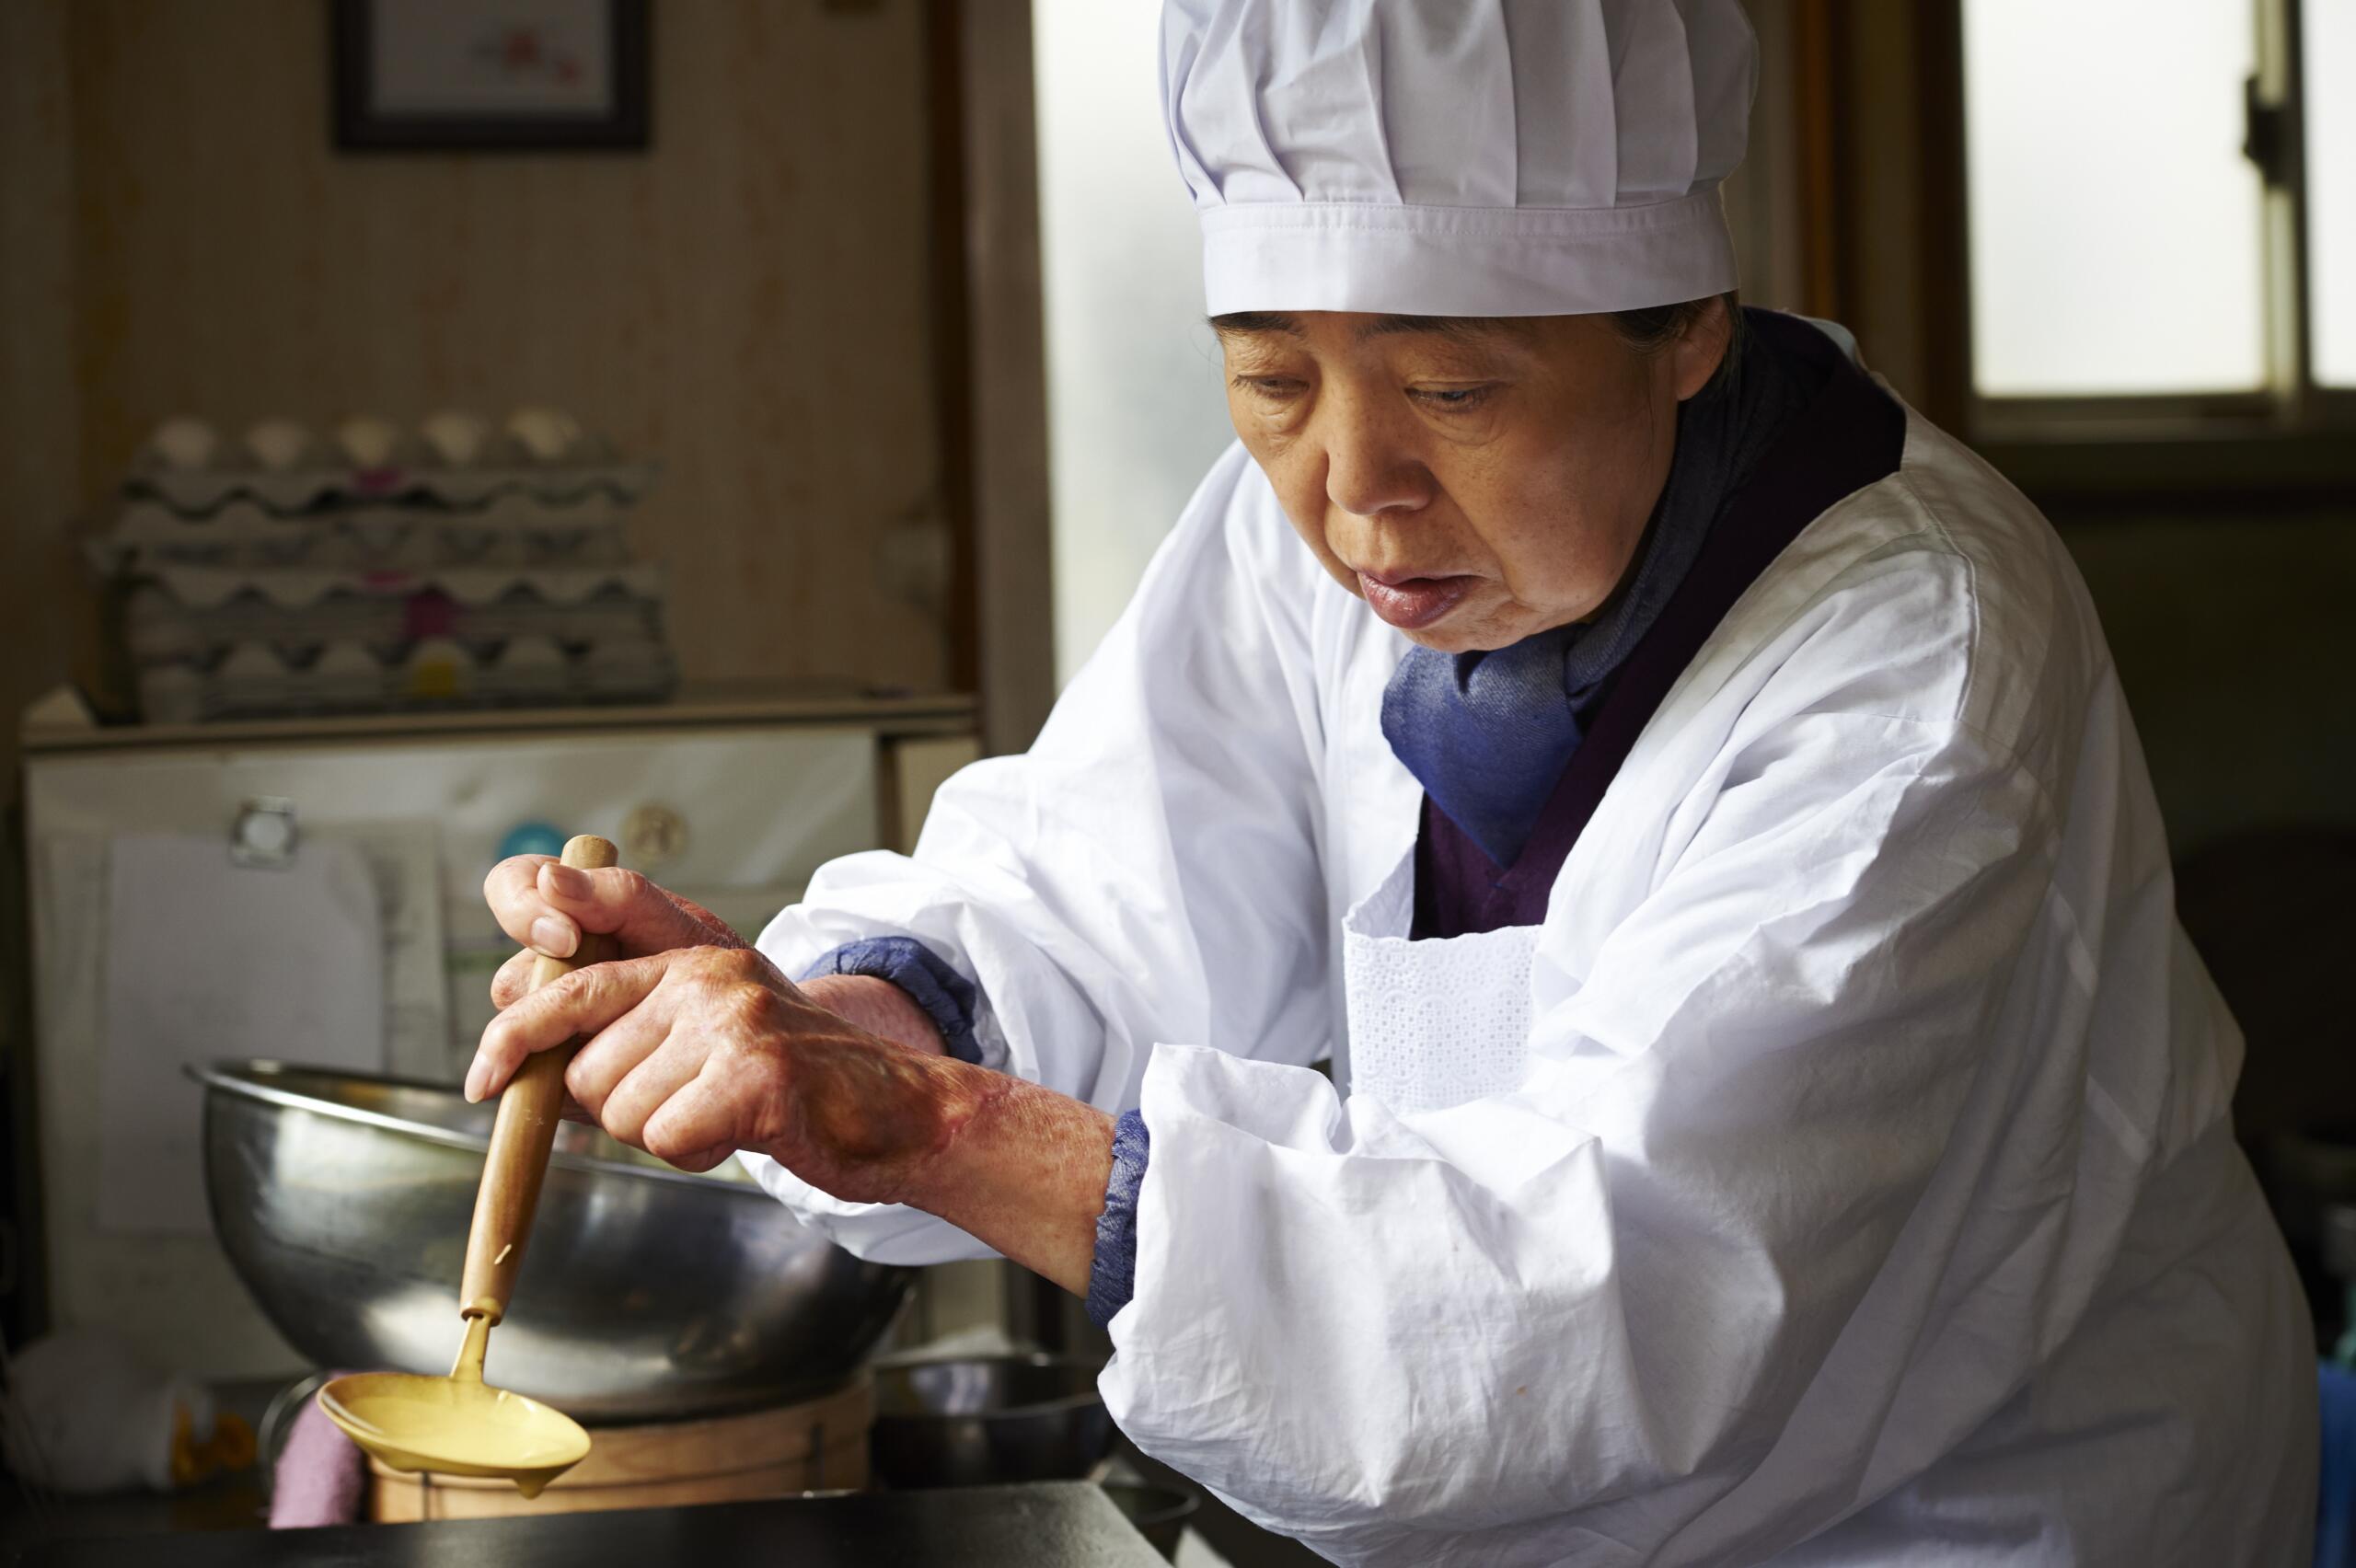 A Japanese cook stands in front of a cooker and pours pancake batter onto a plate.